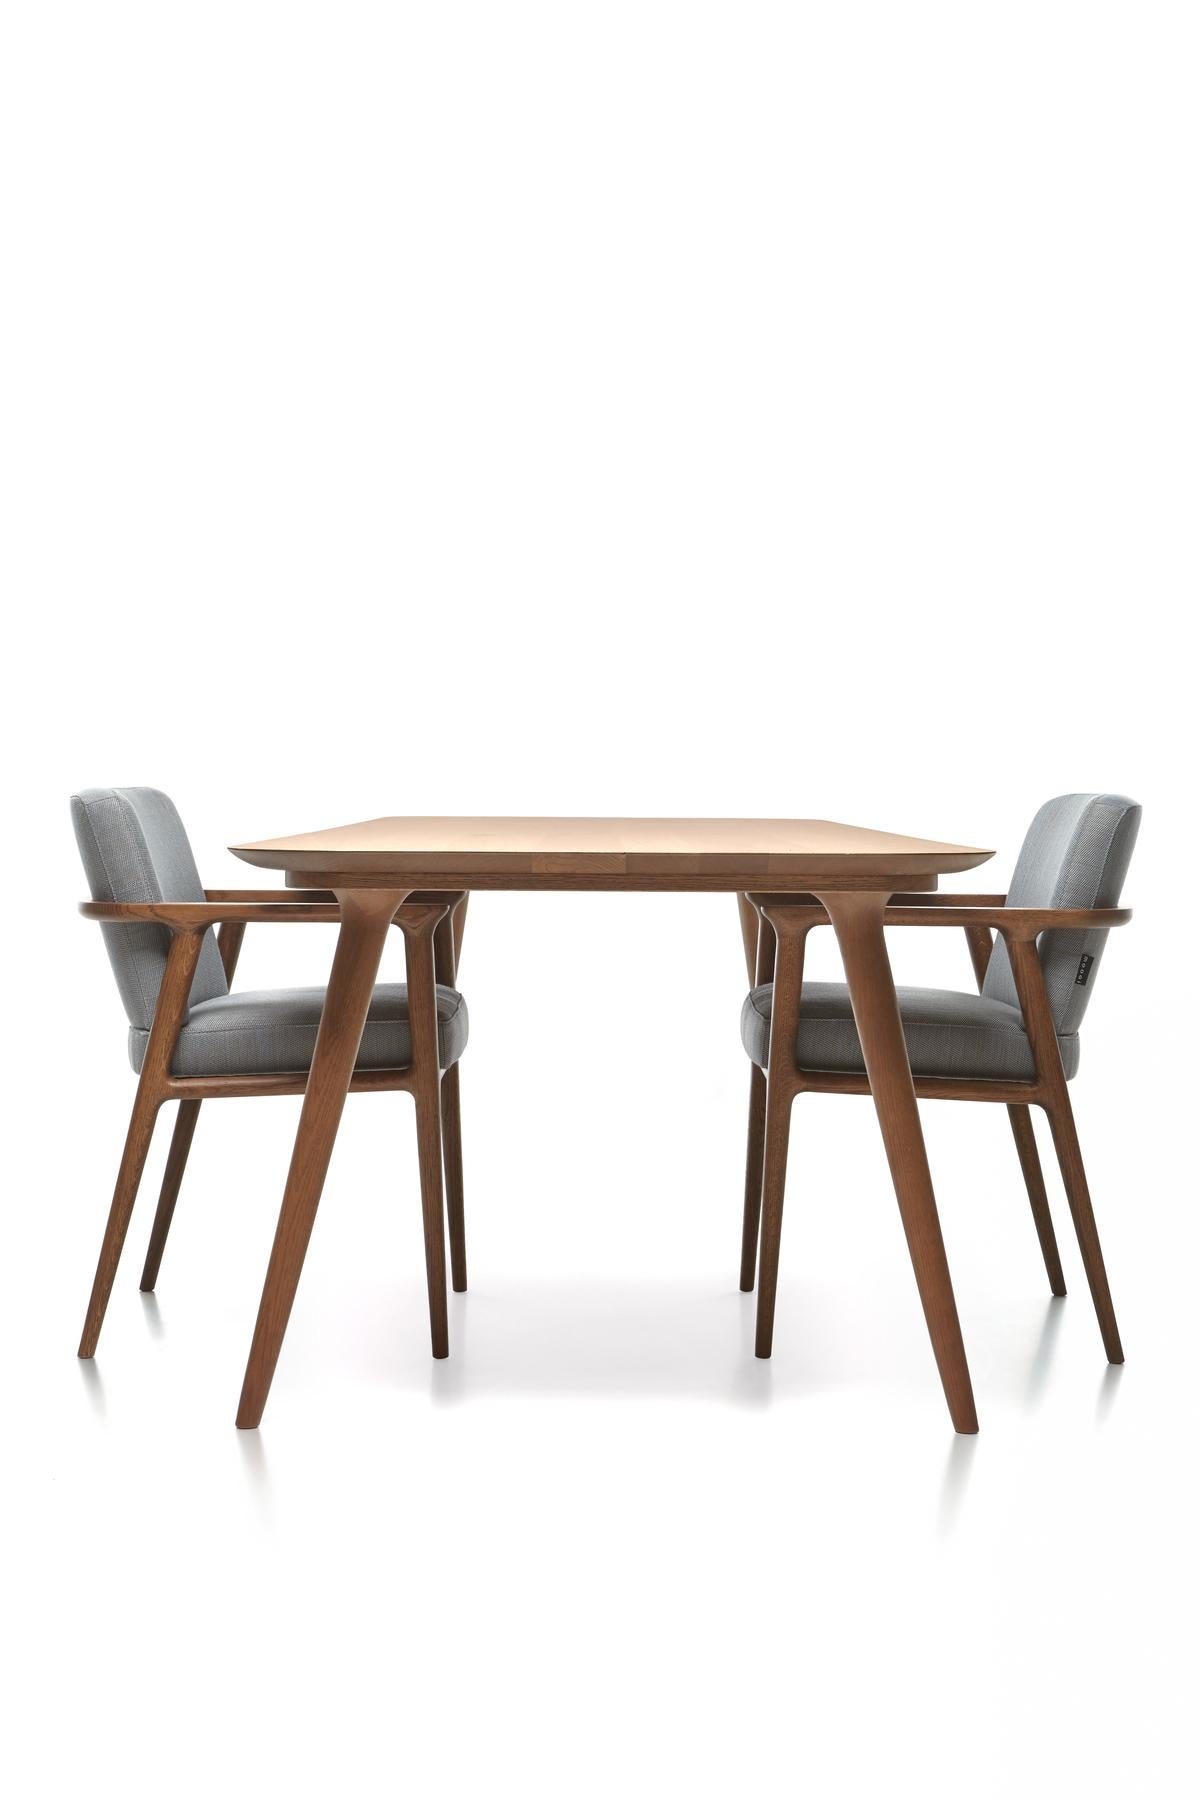 Moooi Zio Dining Chair in Vesper Aluminum Seat with Oak Stained Cinnamon Frame For Sale 1